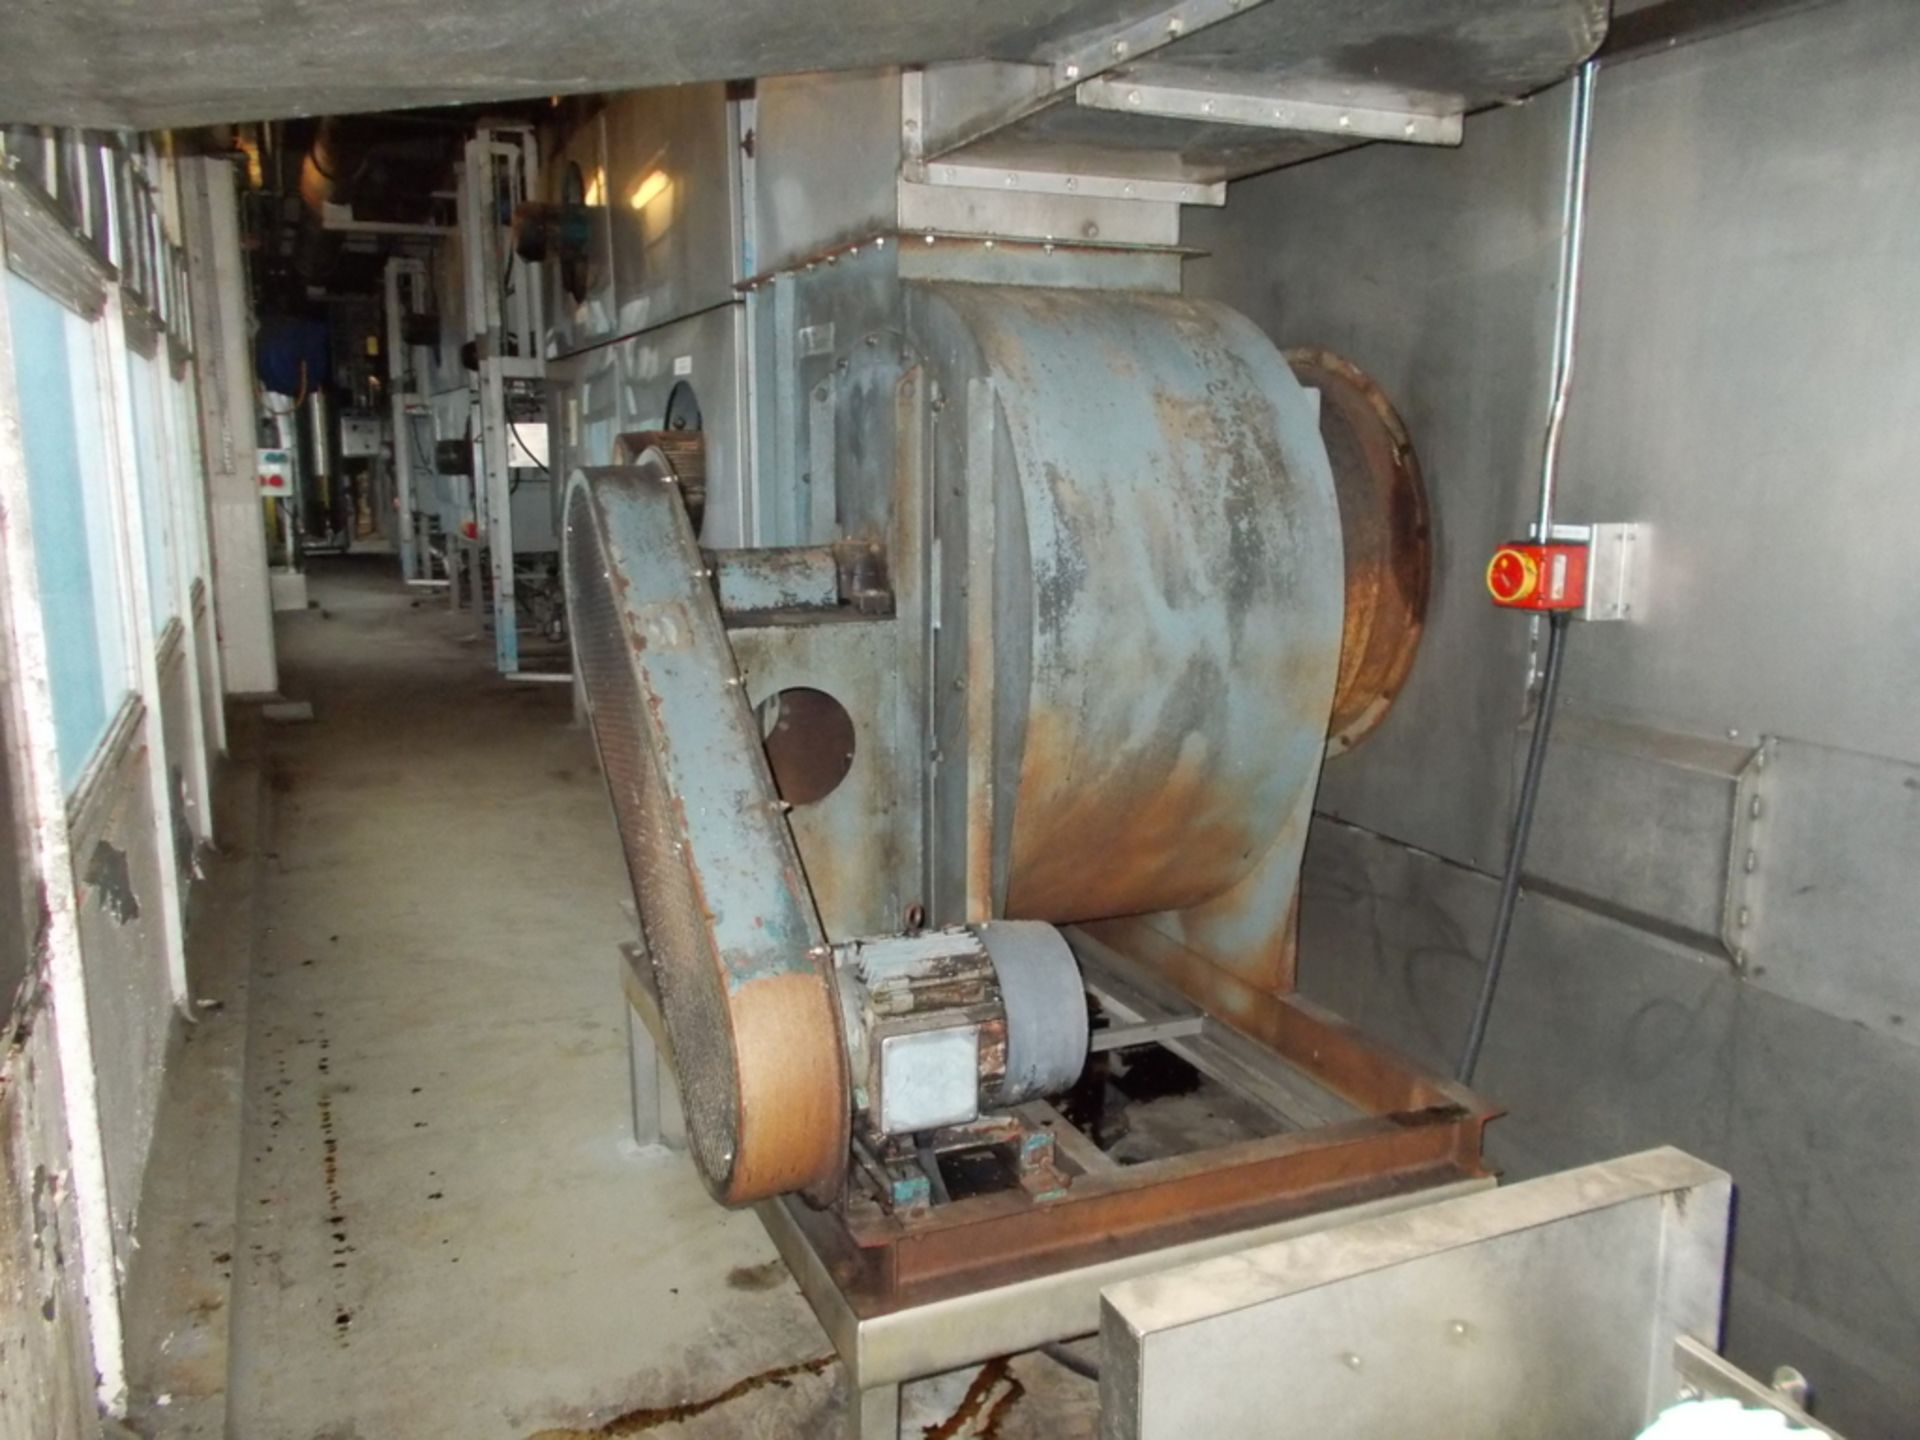 Mitchell gas drying oven - Image 11 of 13